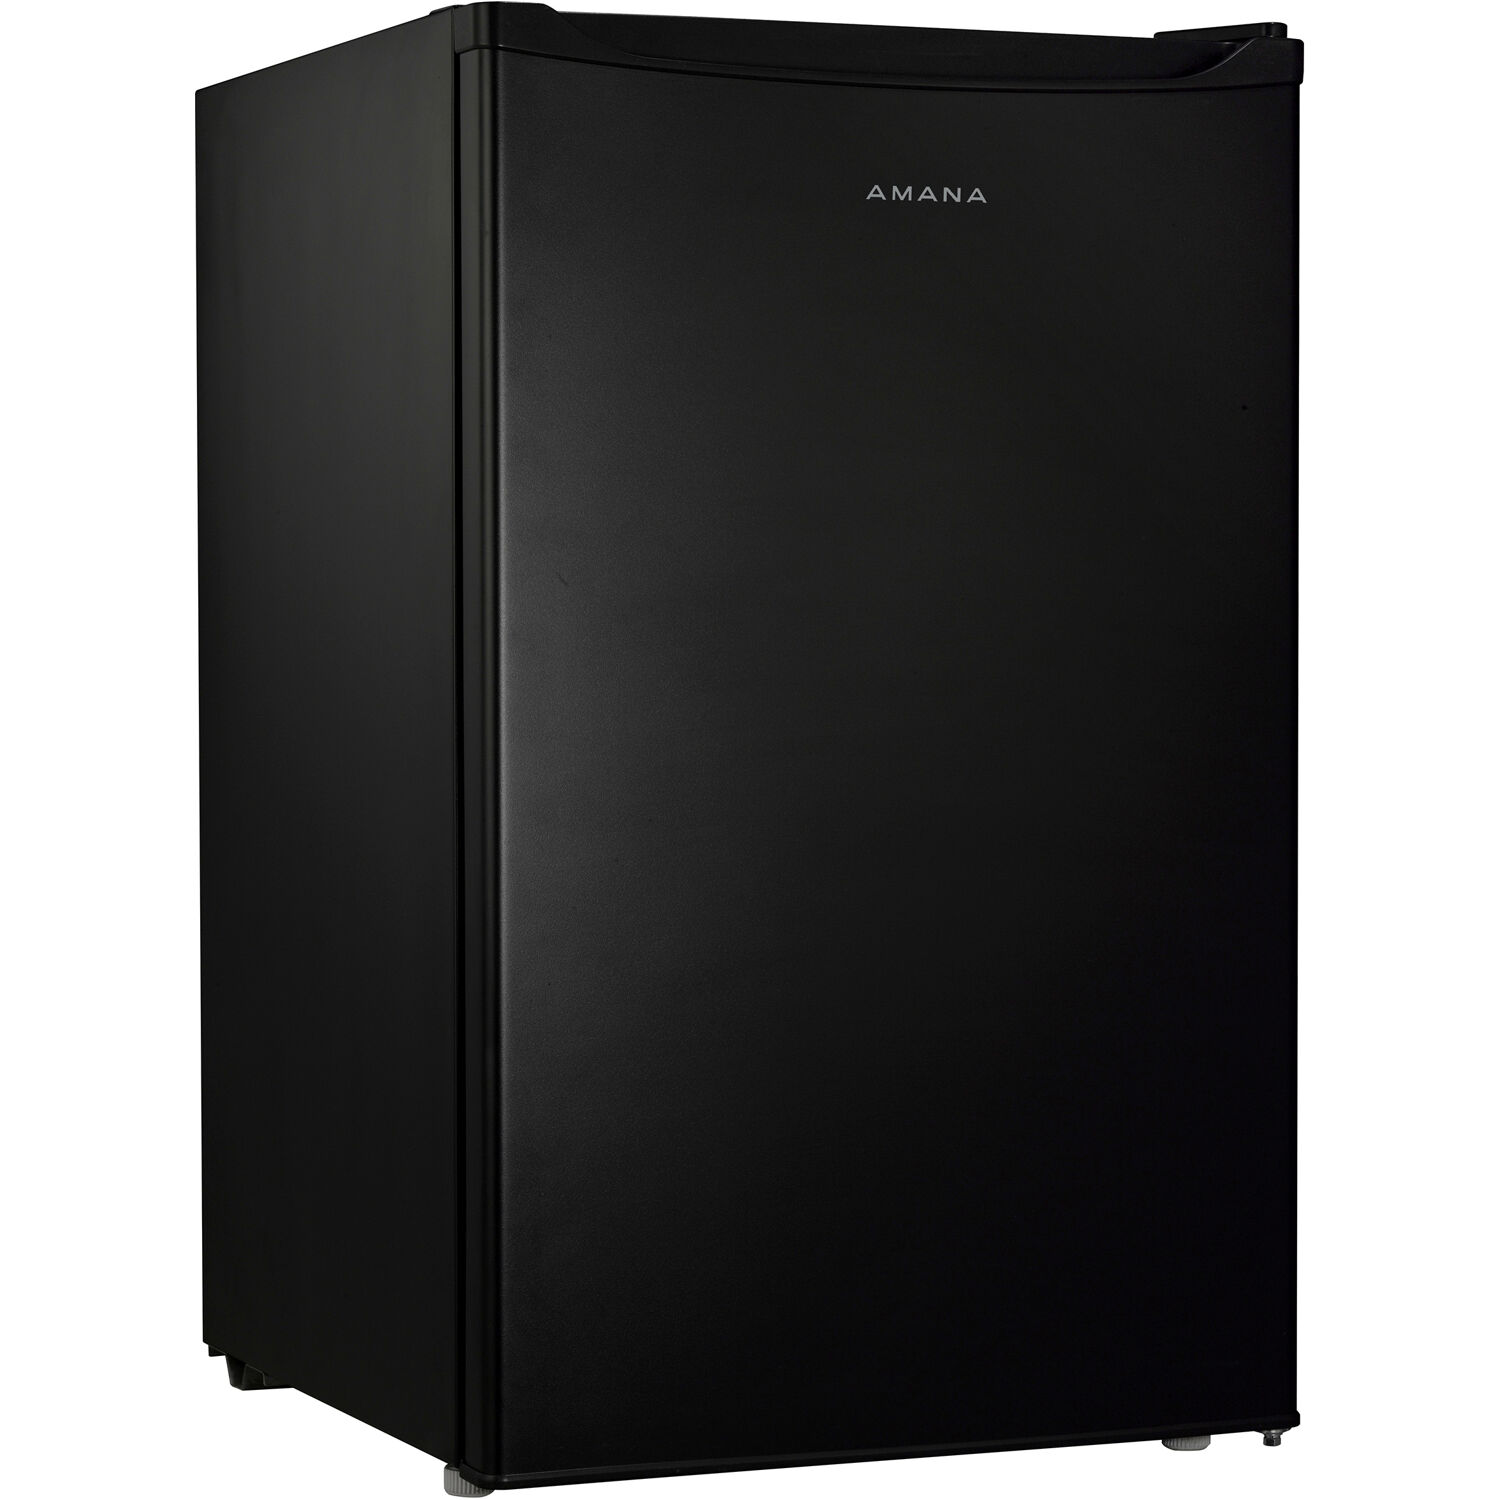 Amana Energy Star 4.3-Cu. Ft. Single-Door Mini Refrigerator with Full-Width Chiller Compartment, Black - image 1 of 5